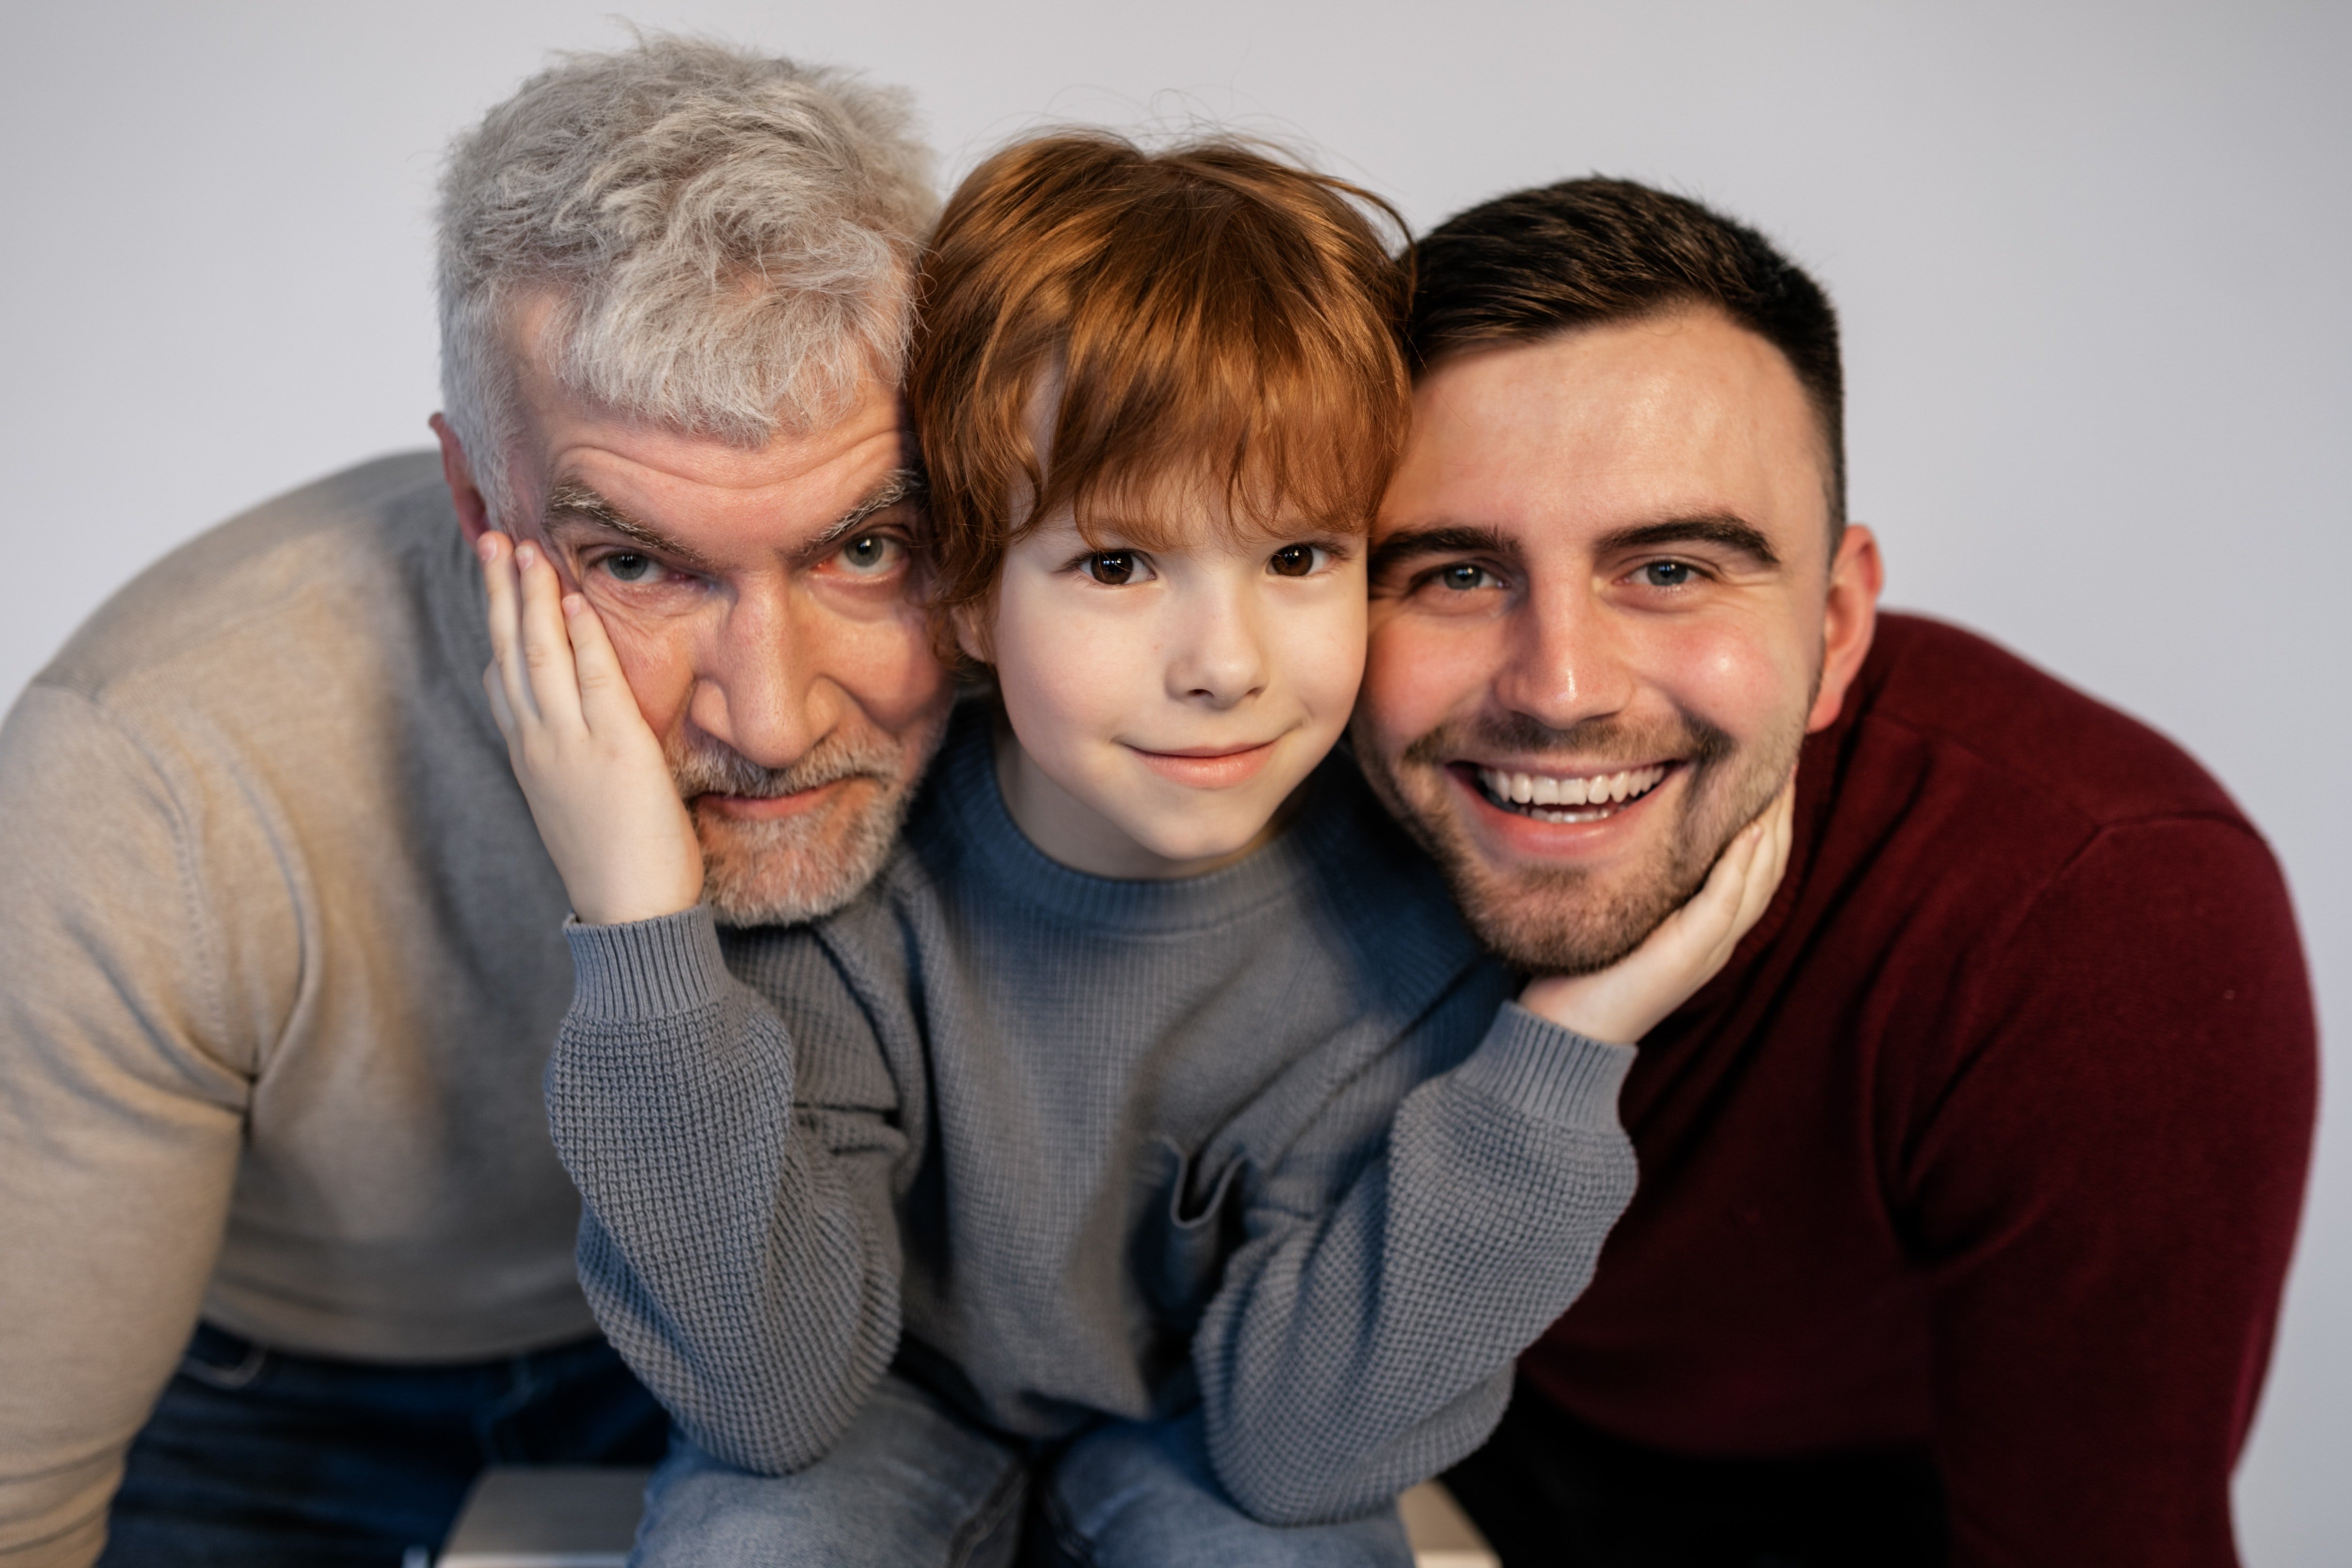 Jared loved his dad and grandfather dearly. | Source: Pexels